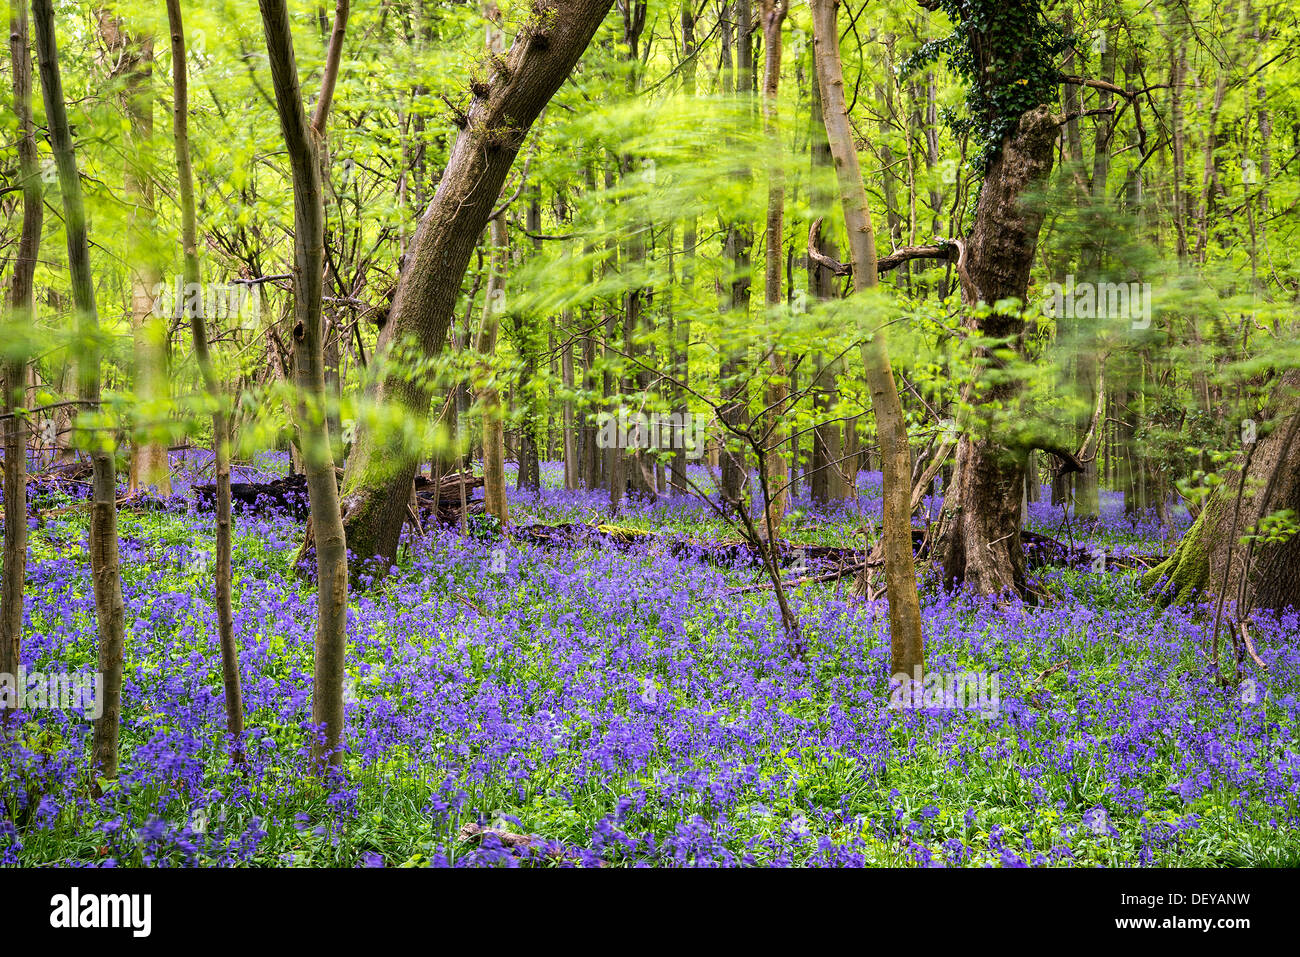 Beautiful carpet of bluebell flowers in Spring forest landscape Stock Photo